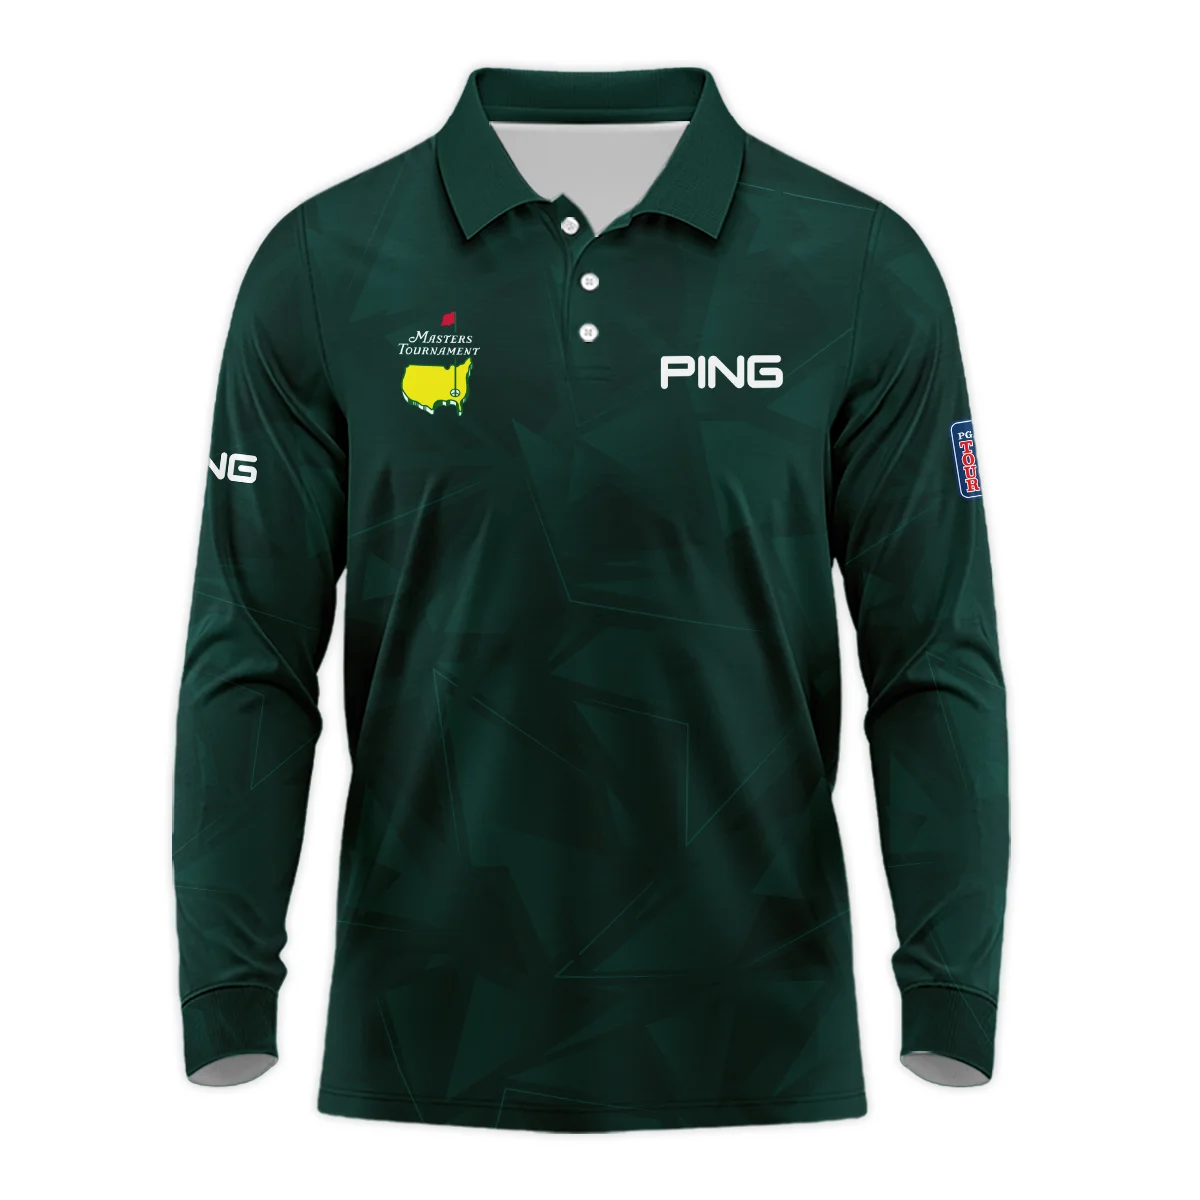 Dark Green Abstract Sport Masters Tournament Ping Vneck Polo Shirt Style Classic Polo Shirt For Men